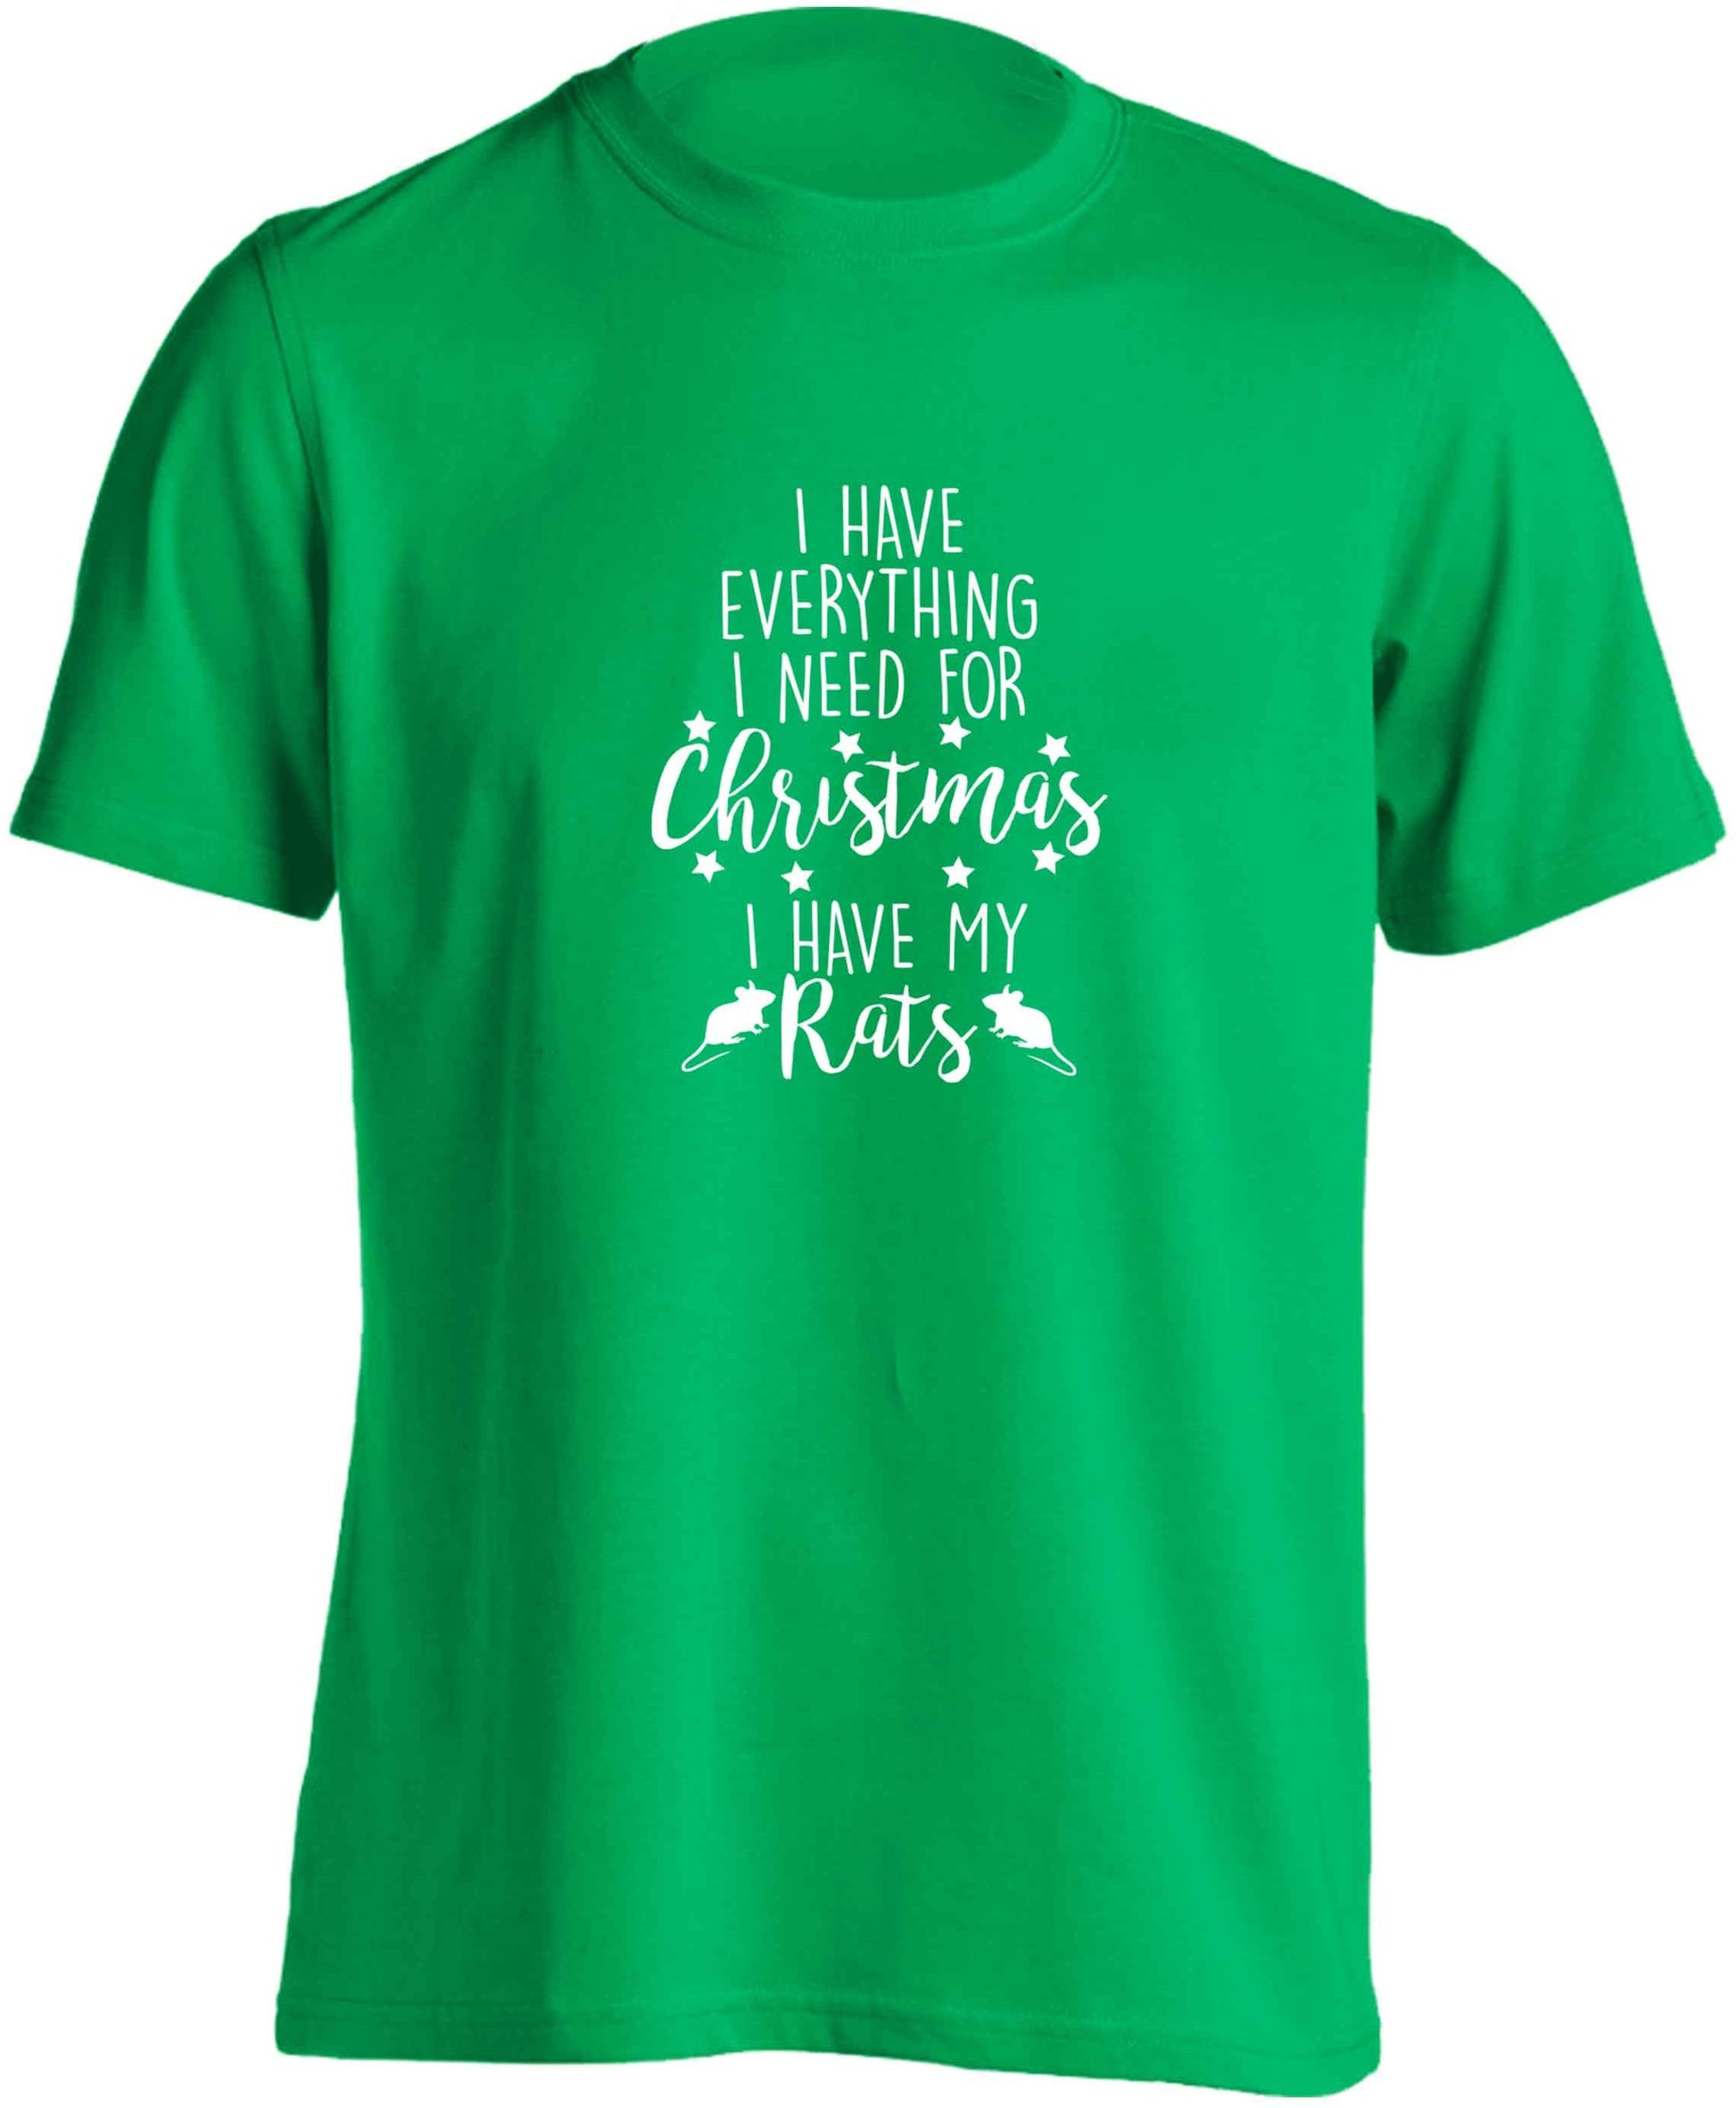 I have everything I need for Christmas I have my rats adults unisex green Tshirt 2XL